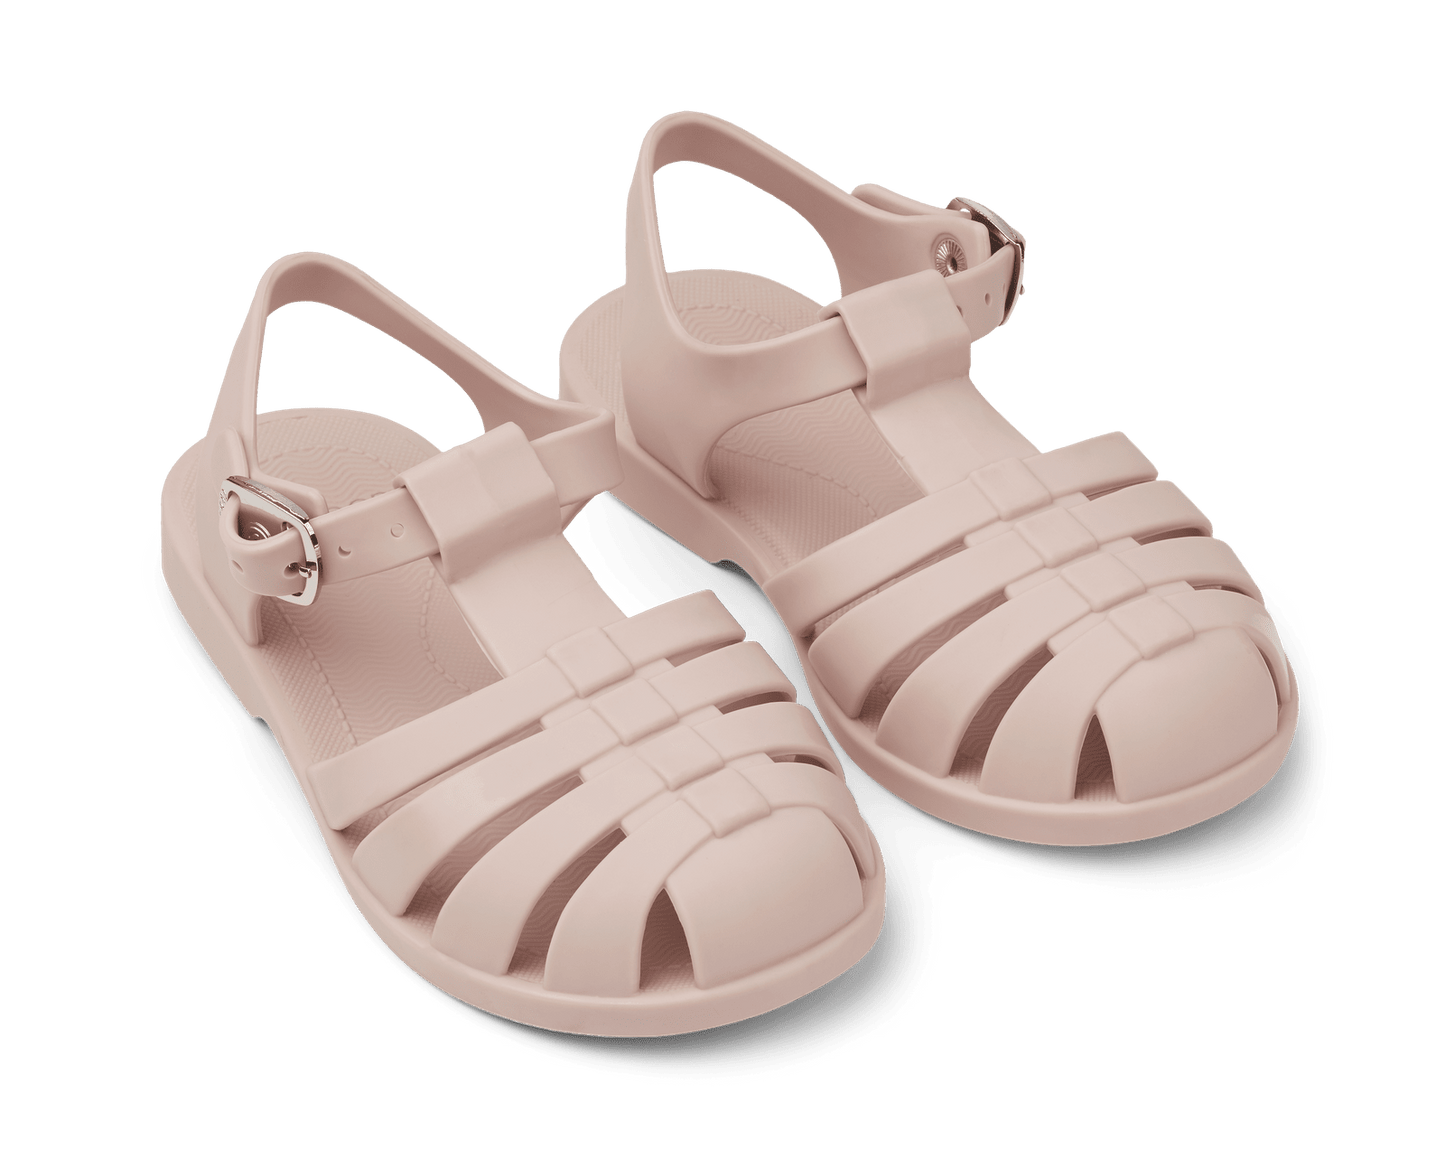 Liewood Kids Bre Sandals in Rose are available in store and online from Nottinghamshire independent children’s store Alf & Co.